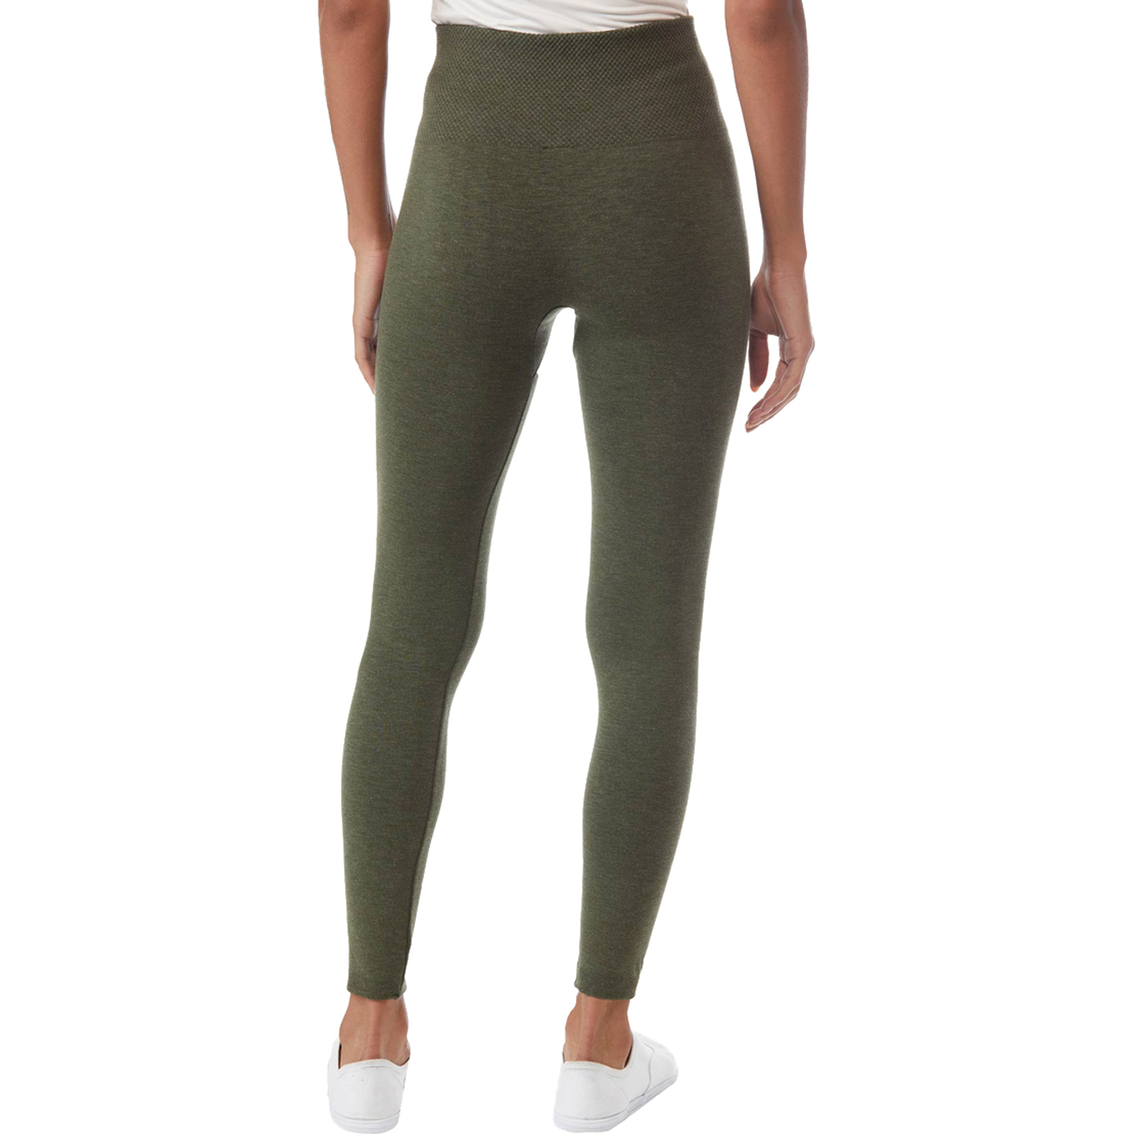 JW Cashmere Touch Fleece Leggings - Image 2 of 2